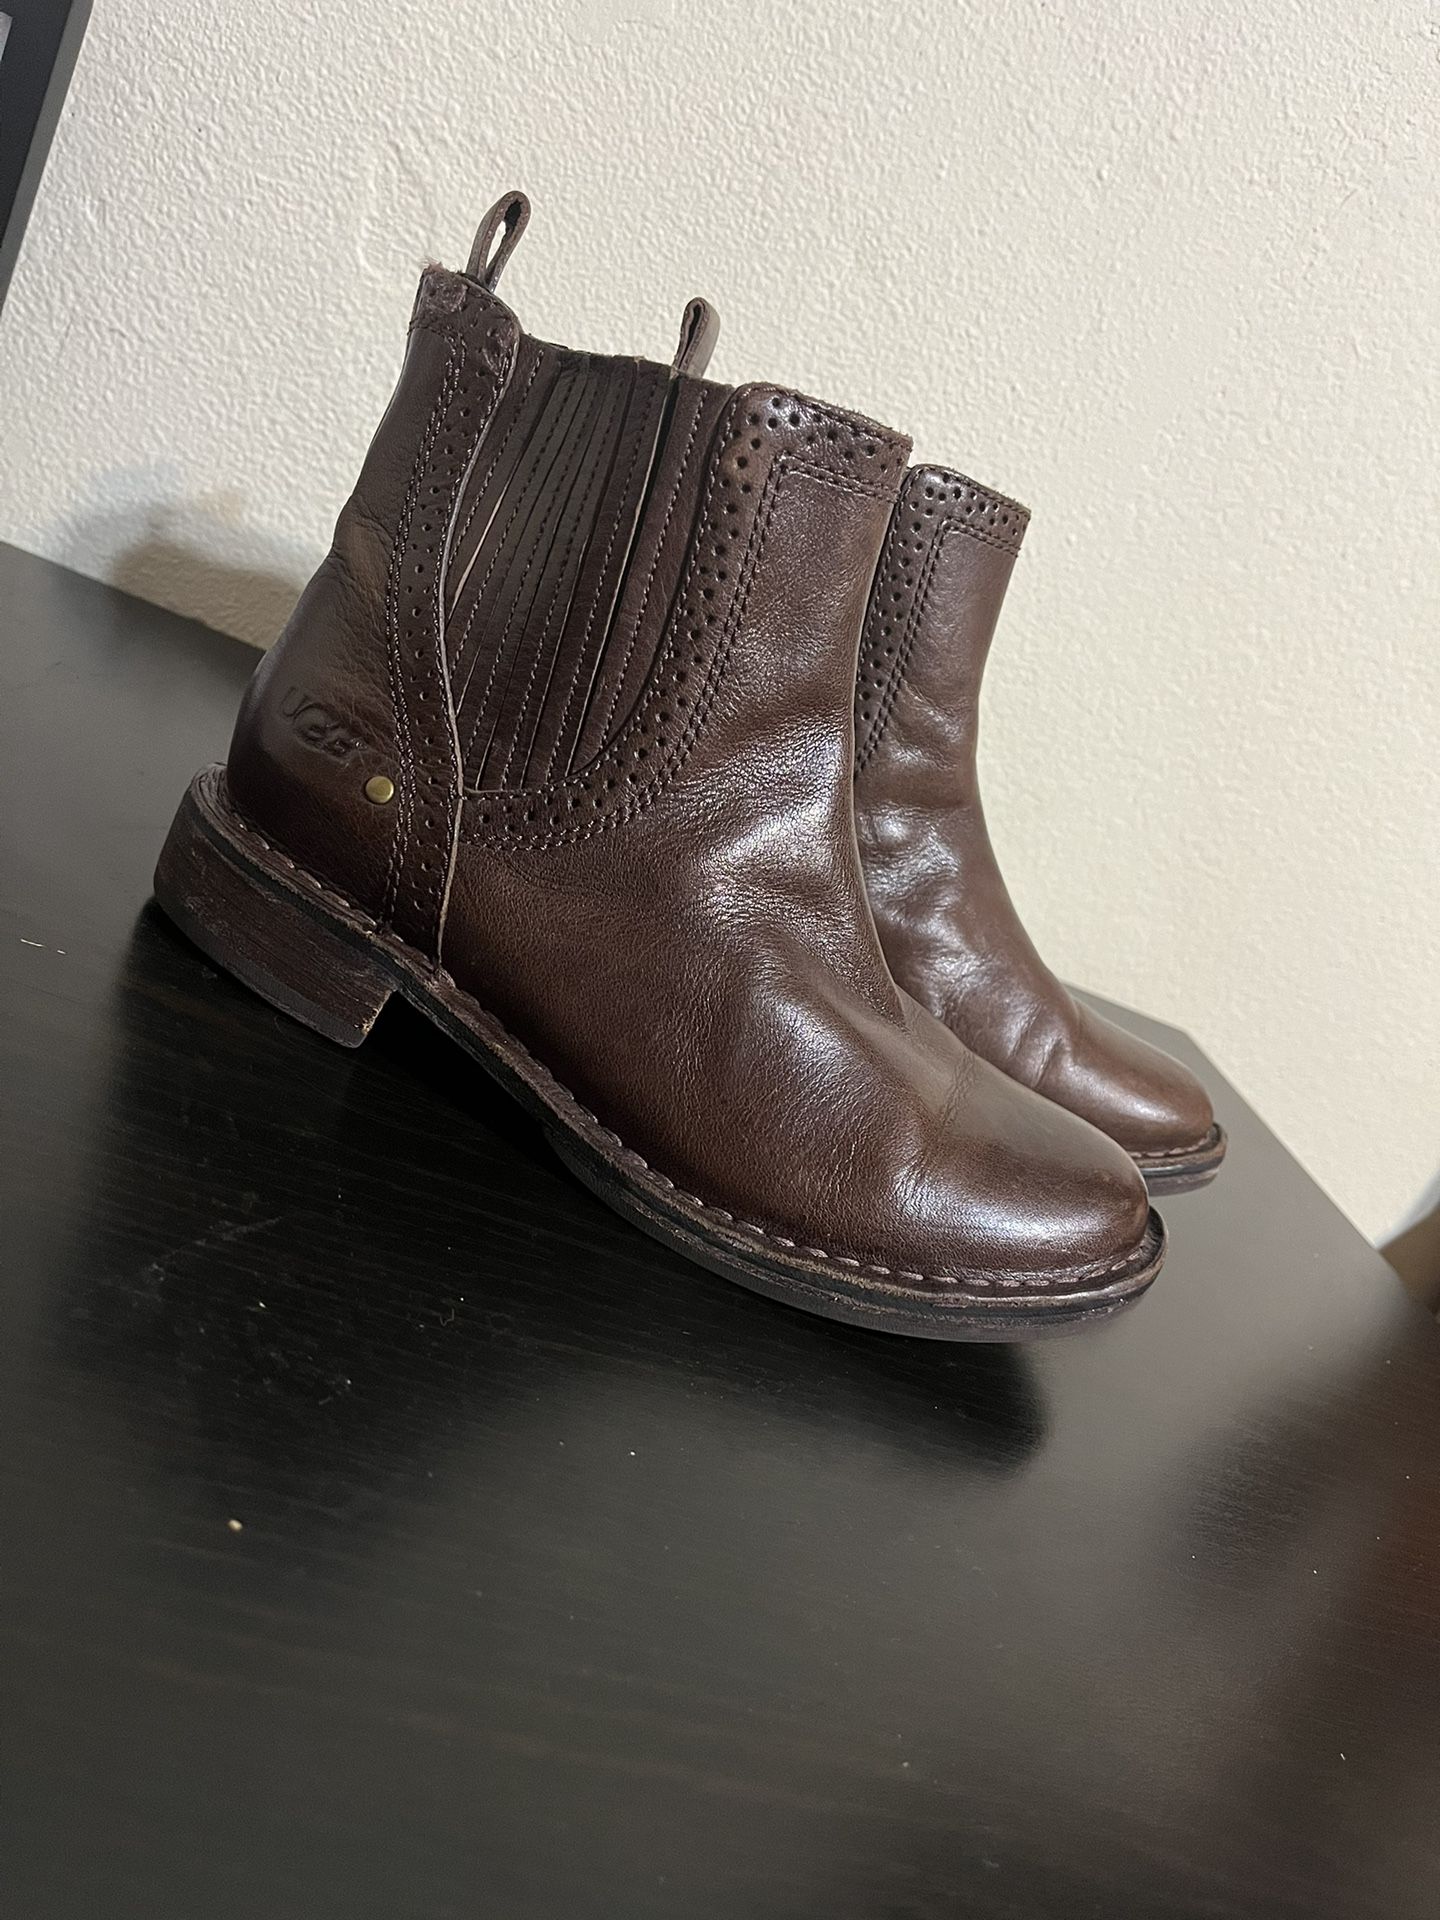 Ugg Chelsea Boots W5.5